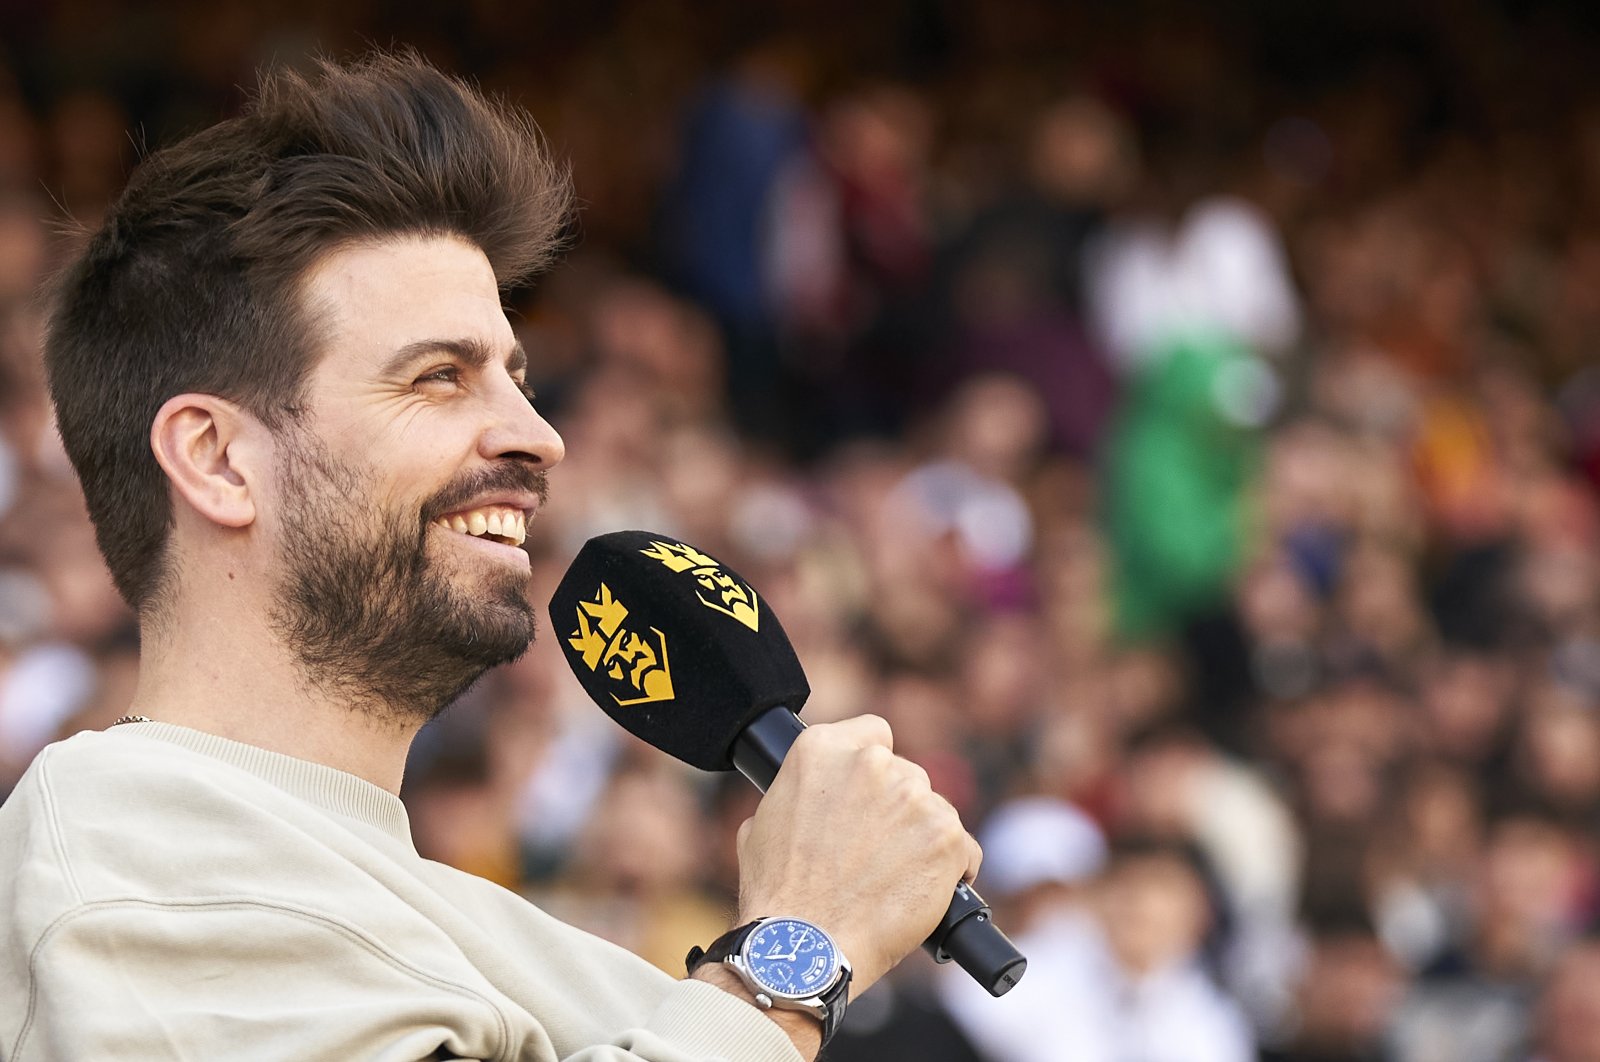 President of Kings League Gerard Pique reacts during the Final Four of the Kings League Tournament 2023 at Spotify Camp Nou, Barcelona, Spain, March 26, 2023. (Getty Images Photo)